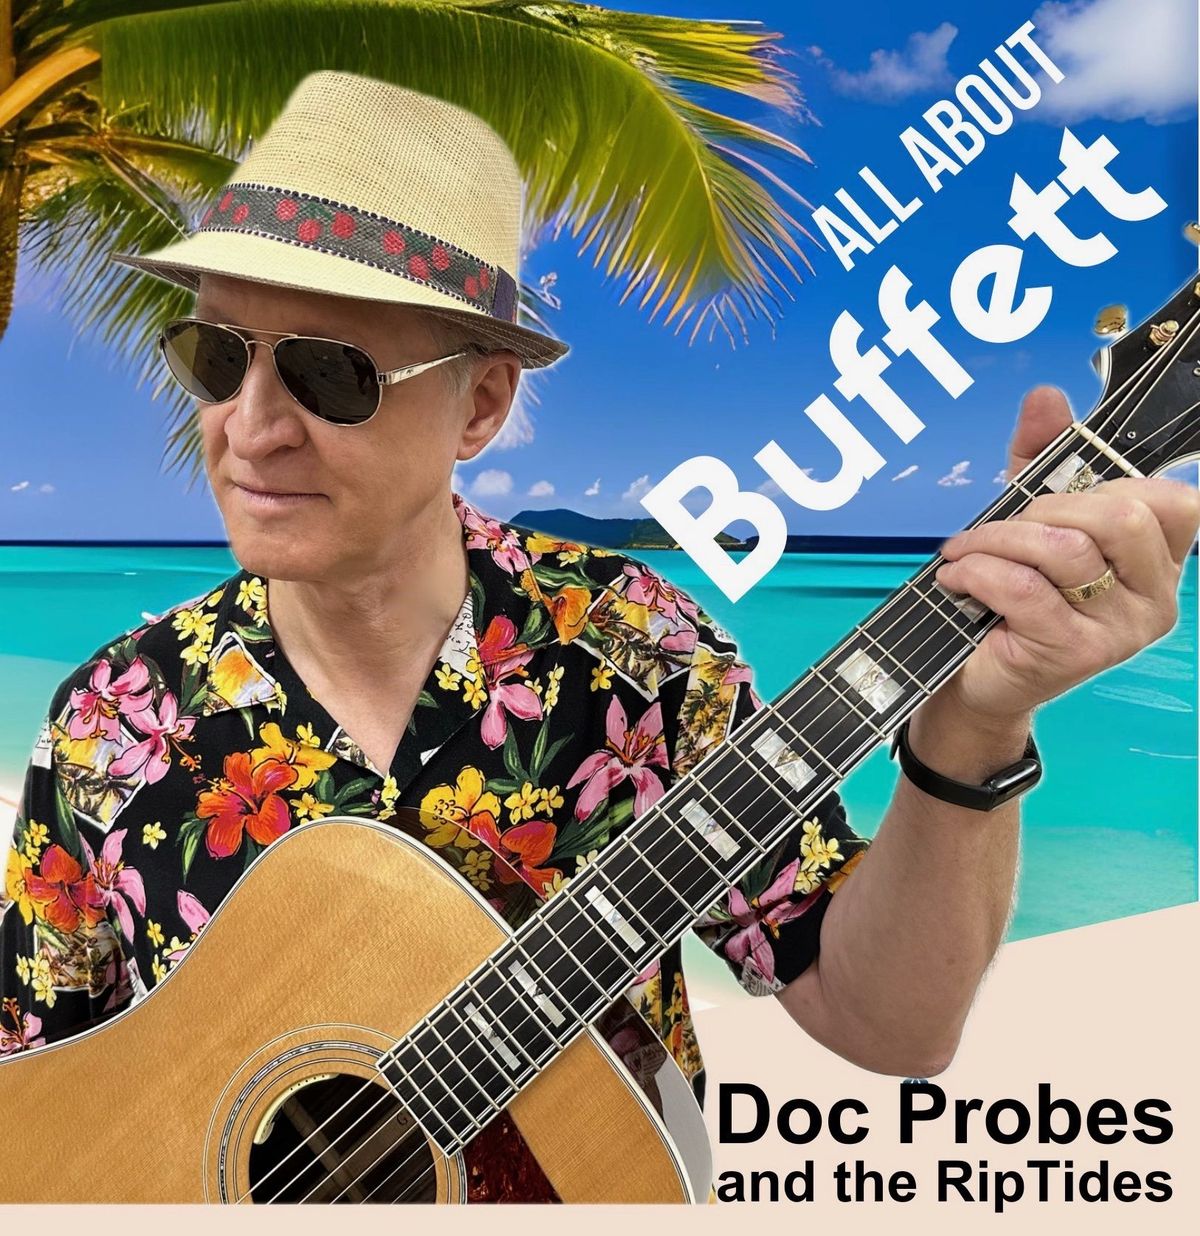 Doc Probes & the Rip Tides - Grand Traverse Pavilions - Concerts On The Lawn